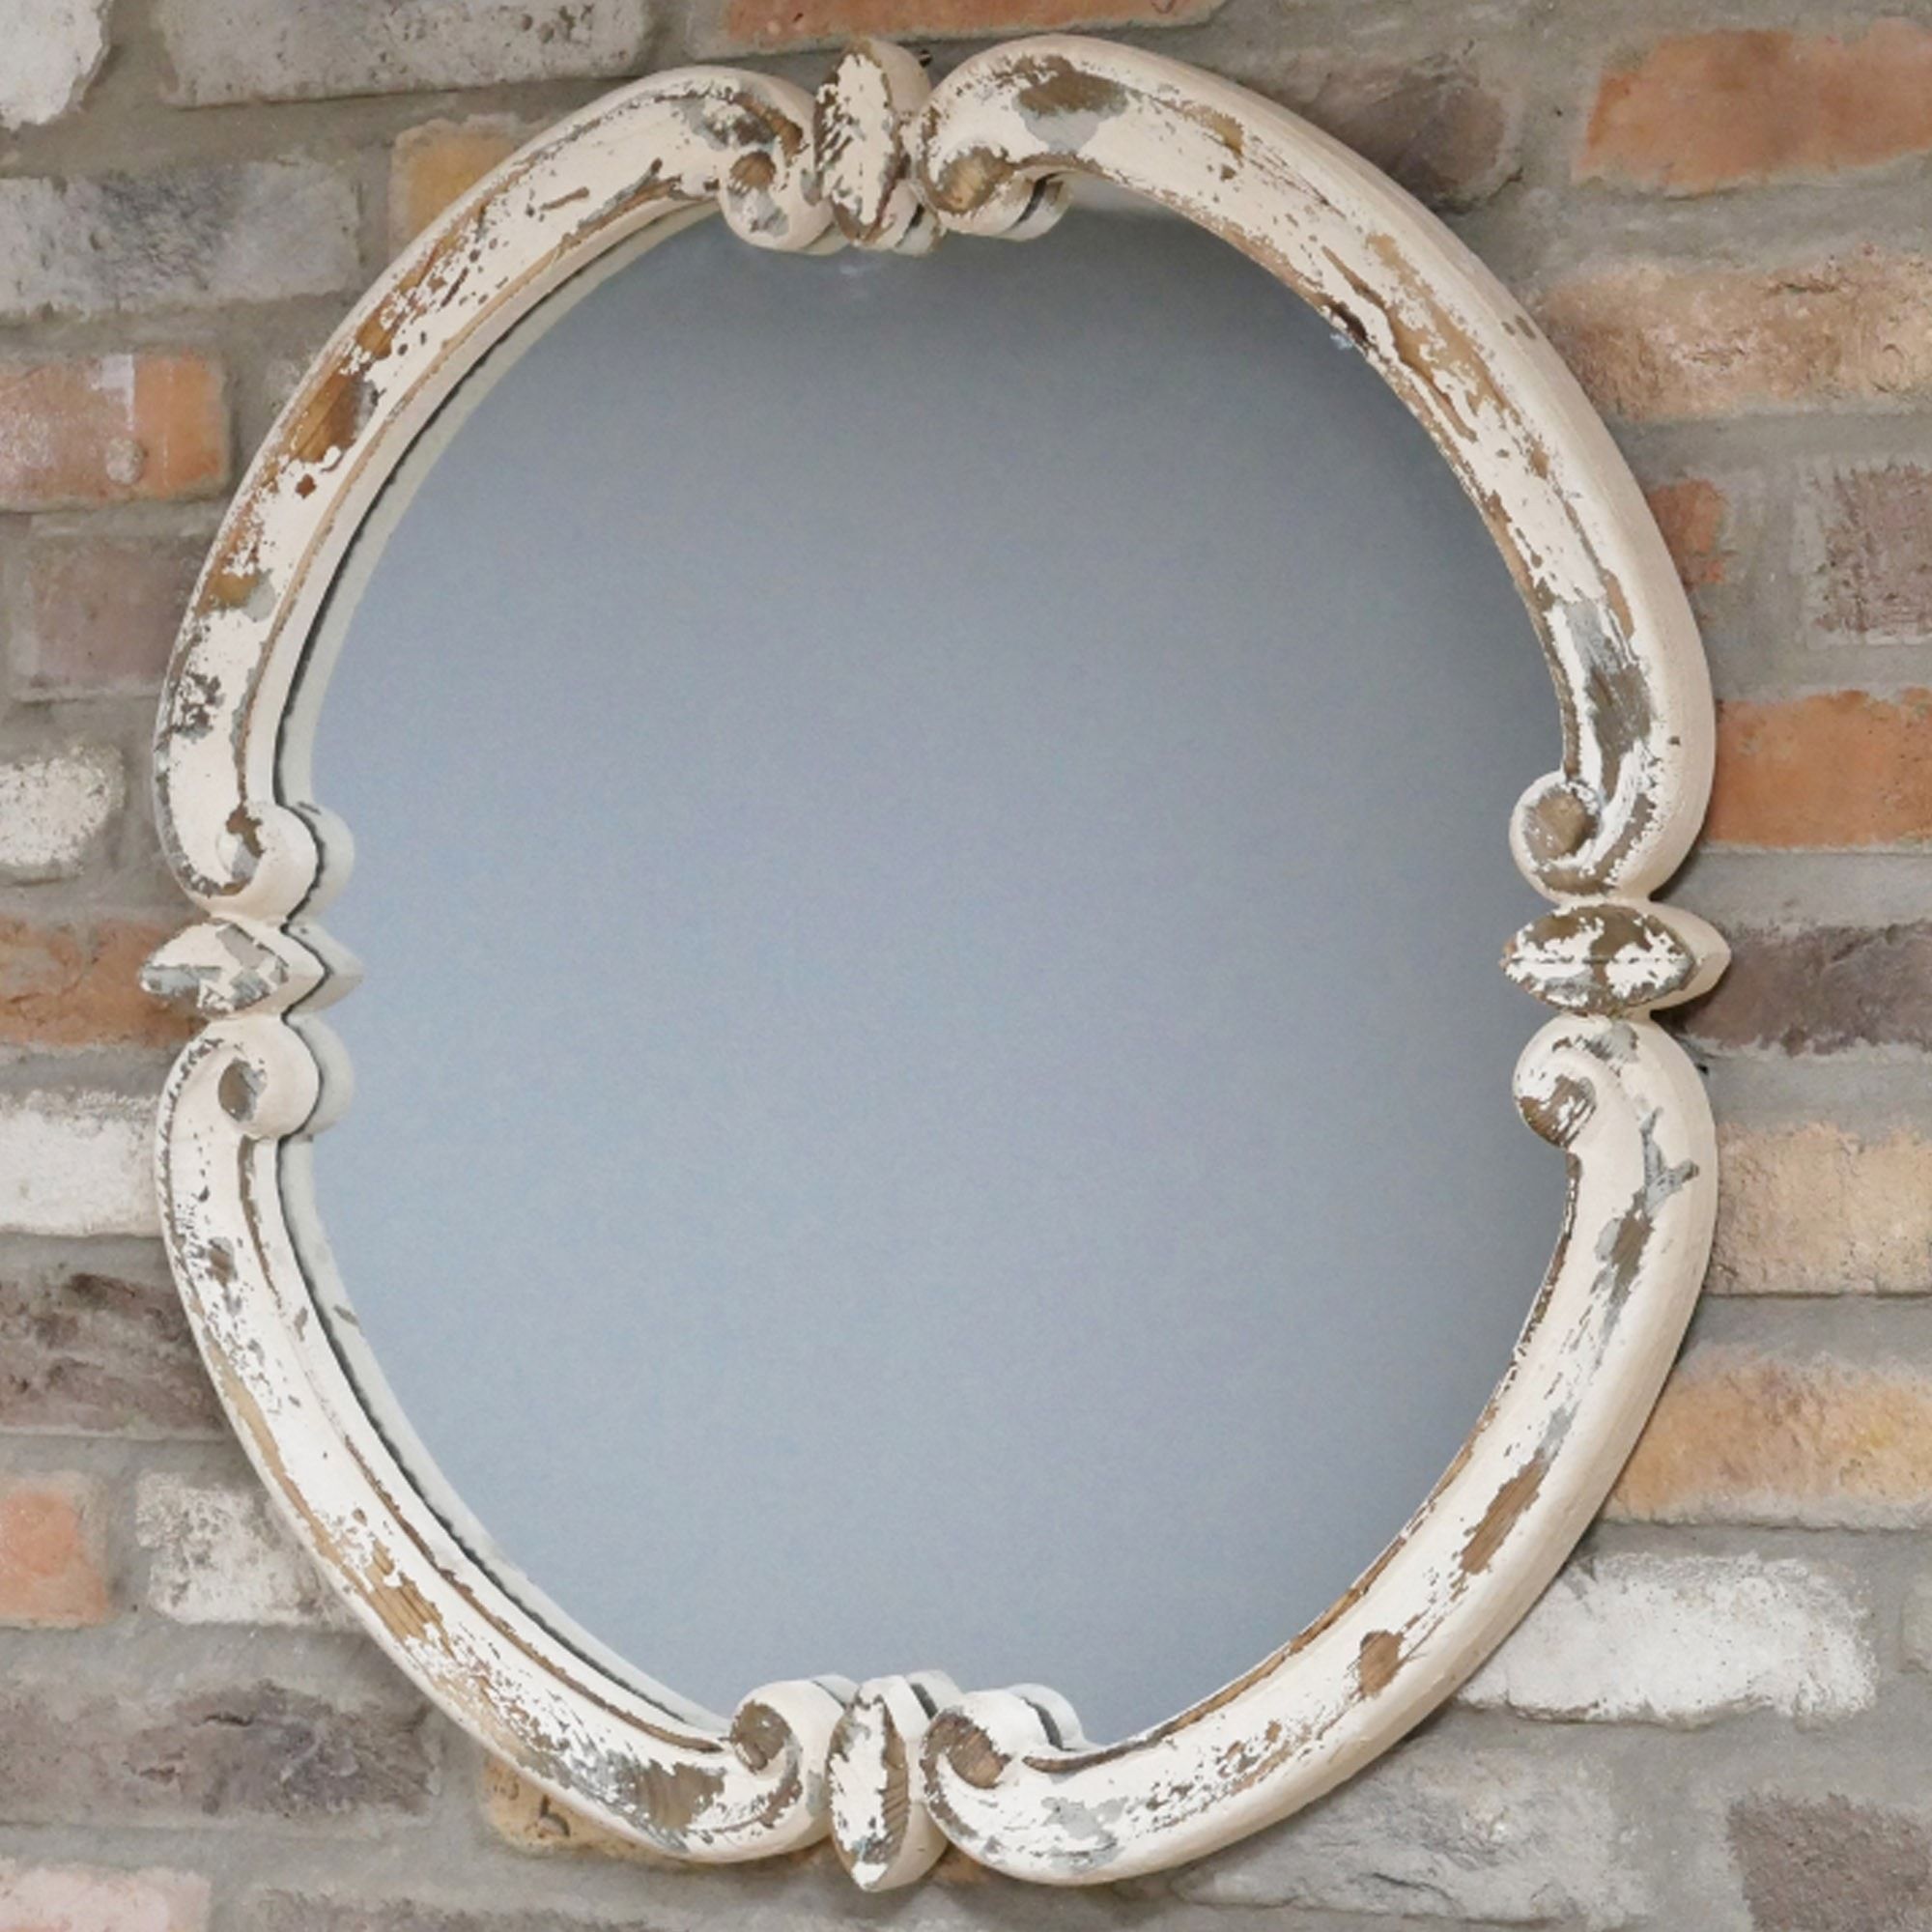 Distressed White Mirror | Wall Mirrors | Decorative Mirrors With Regard To Wall Mirrors (View 14 of 15)